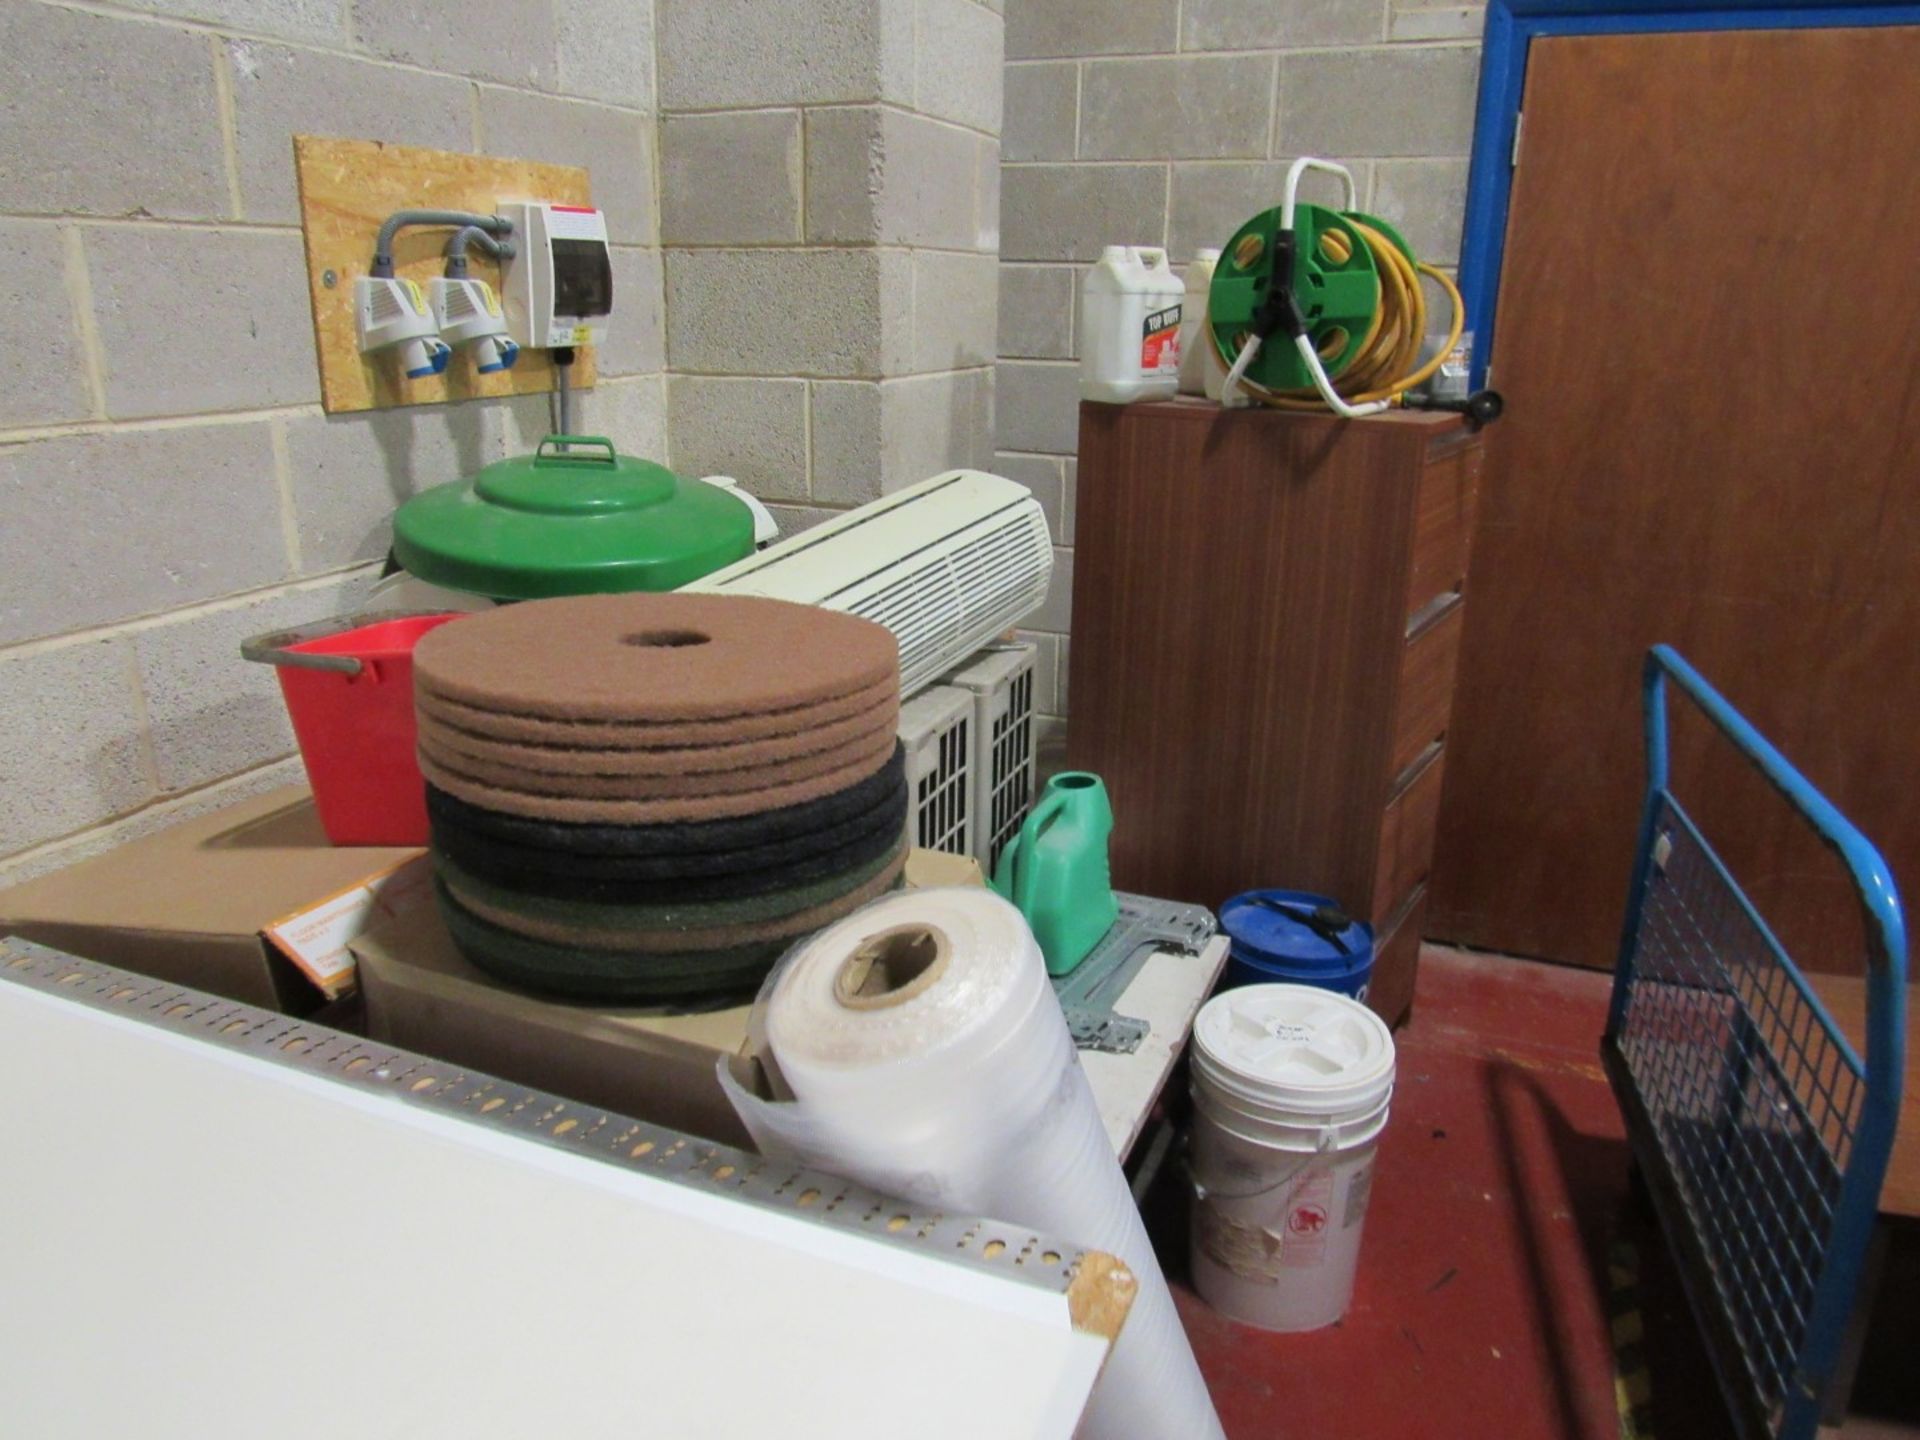 Mobile table and air conditioning units (not installed) - Image 3 of 3